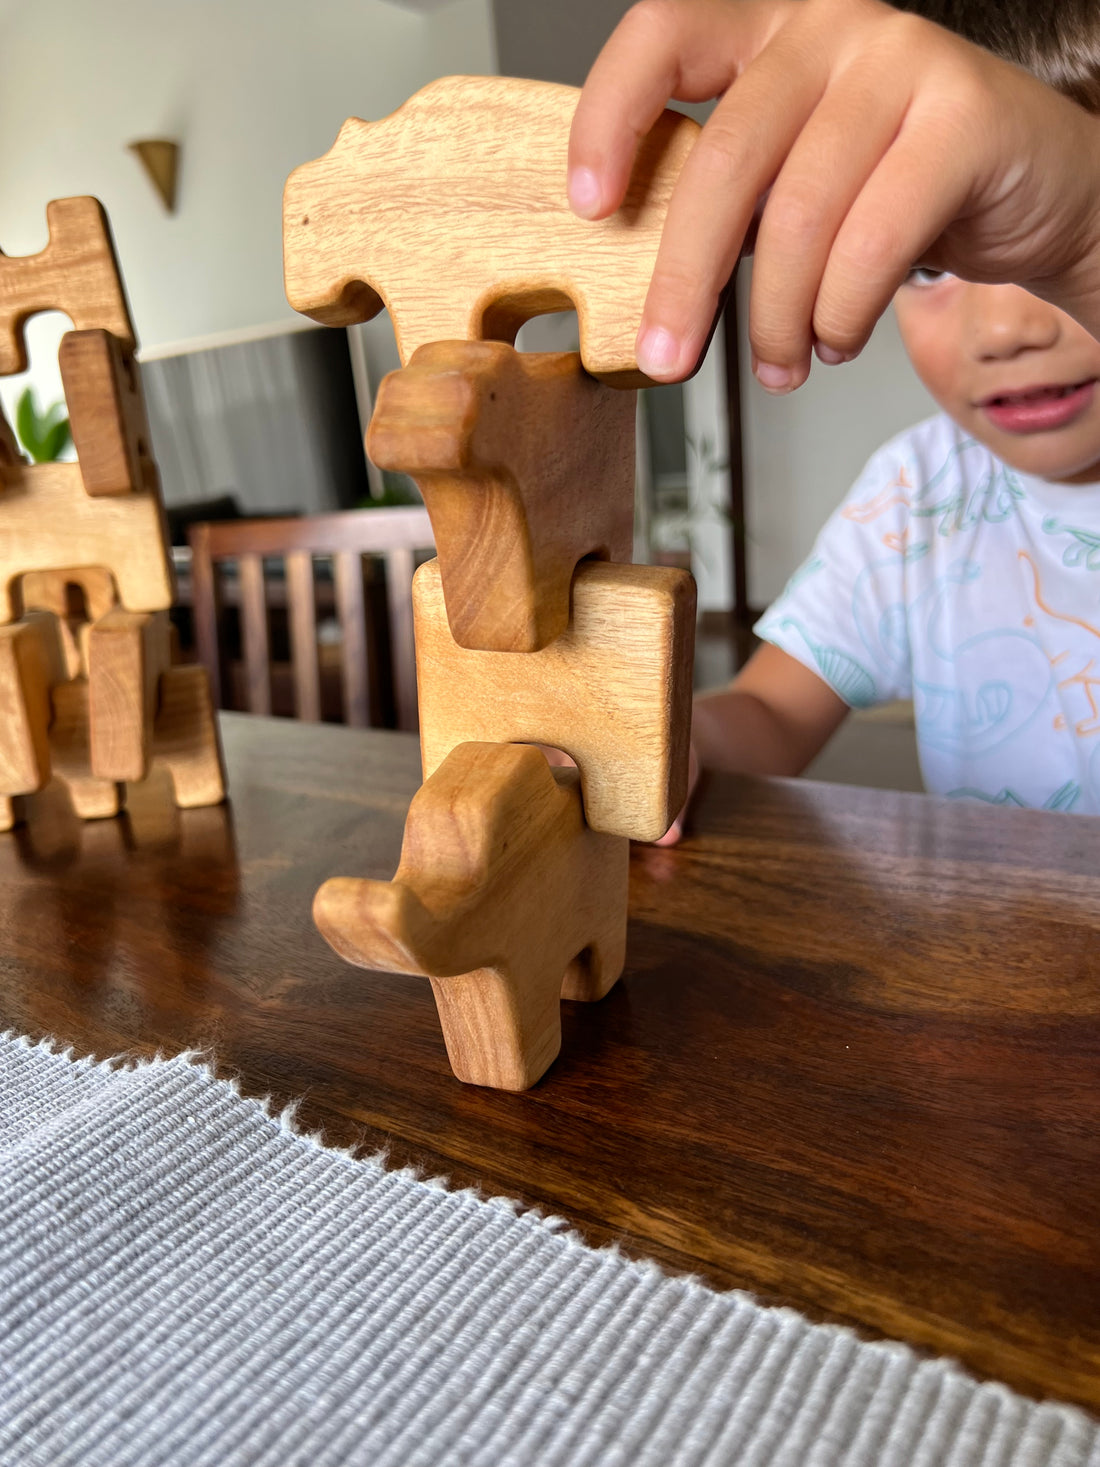 A Practical Guide to Using Wooden Blocks for Math Learning